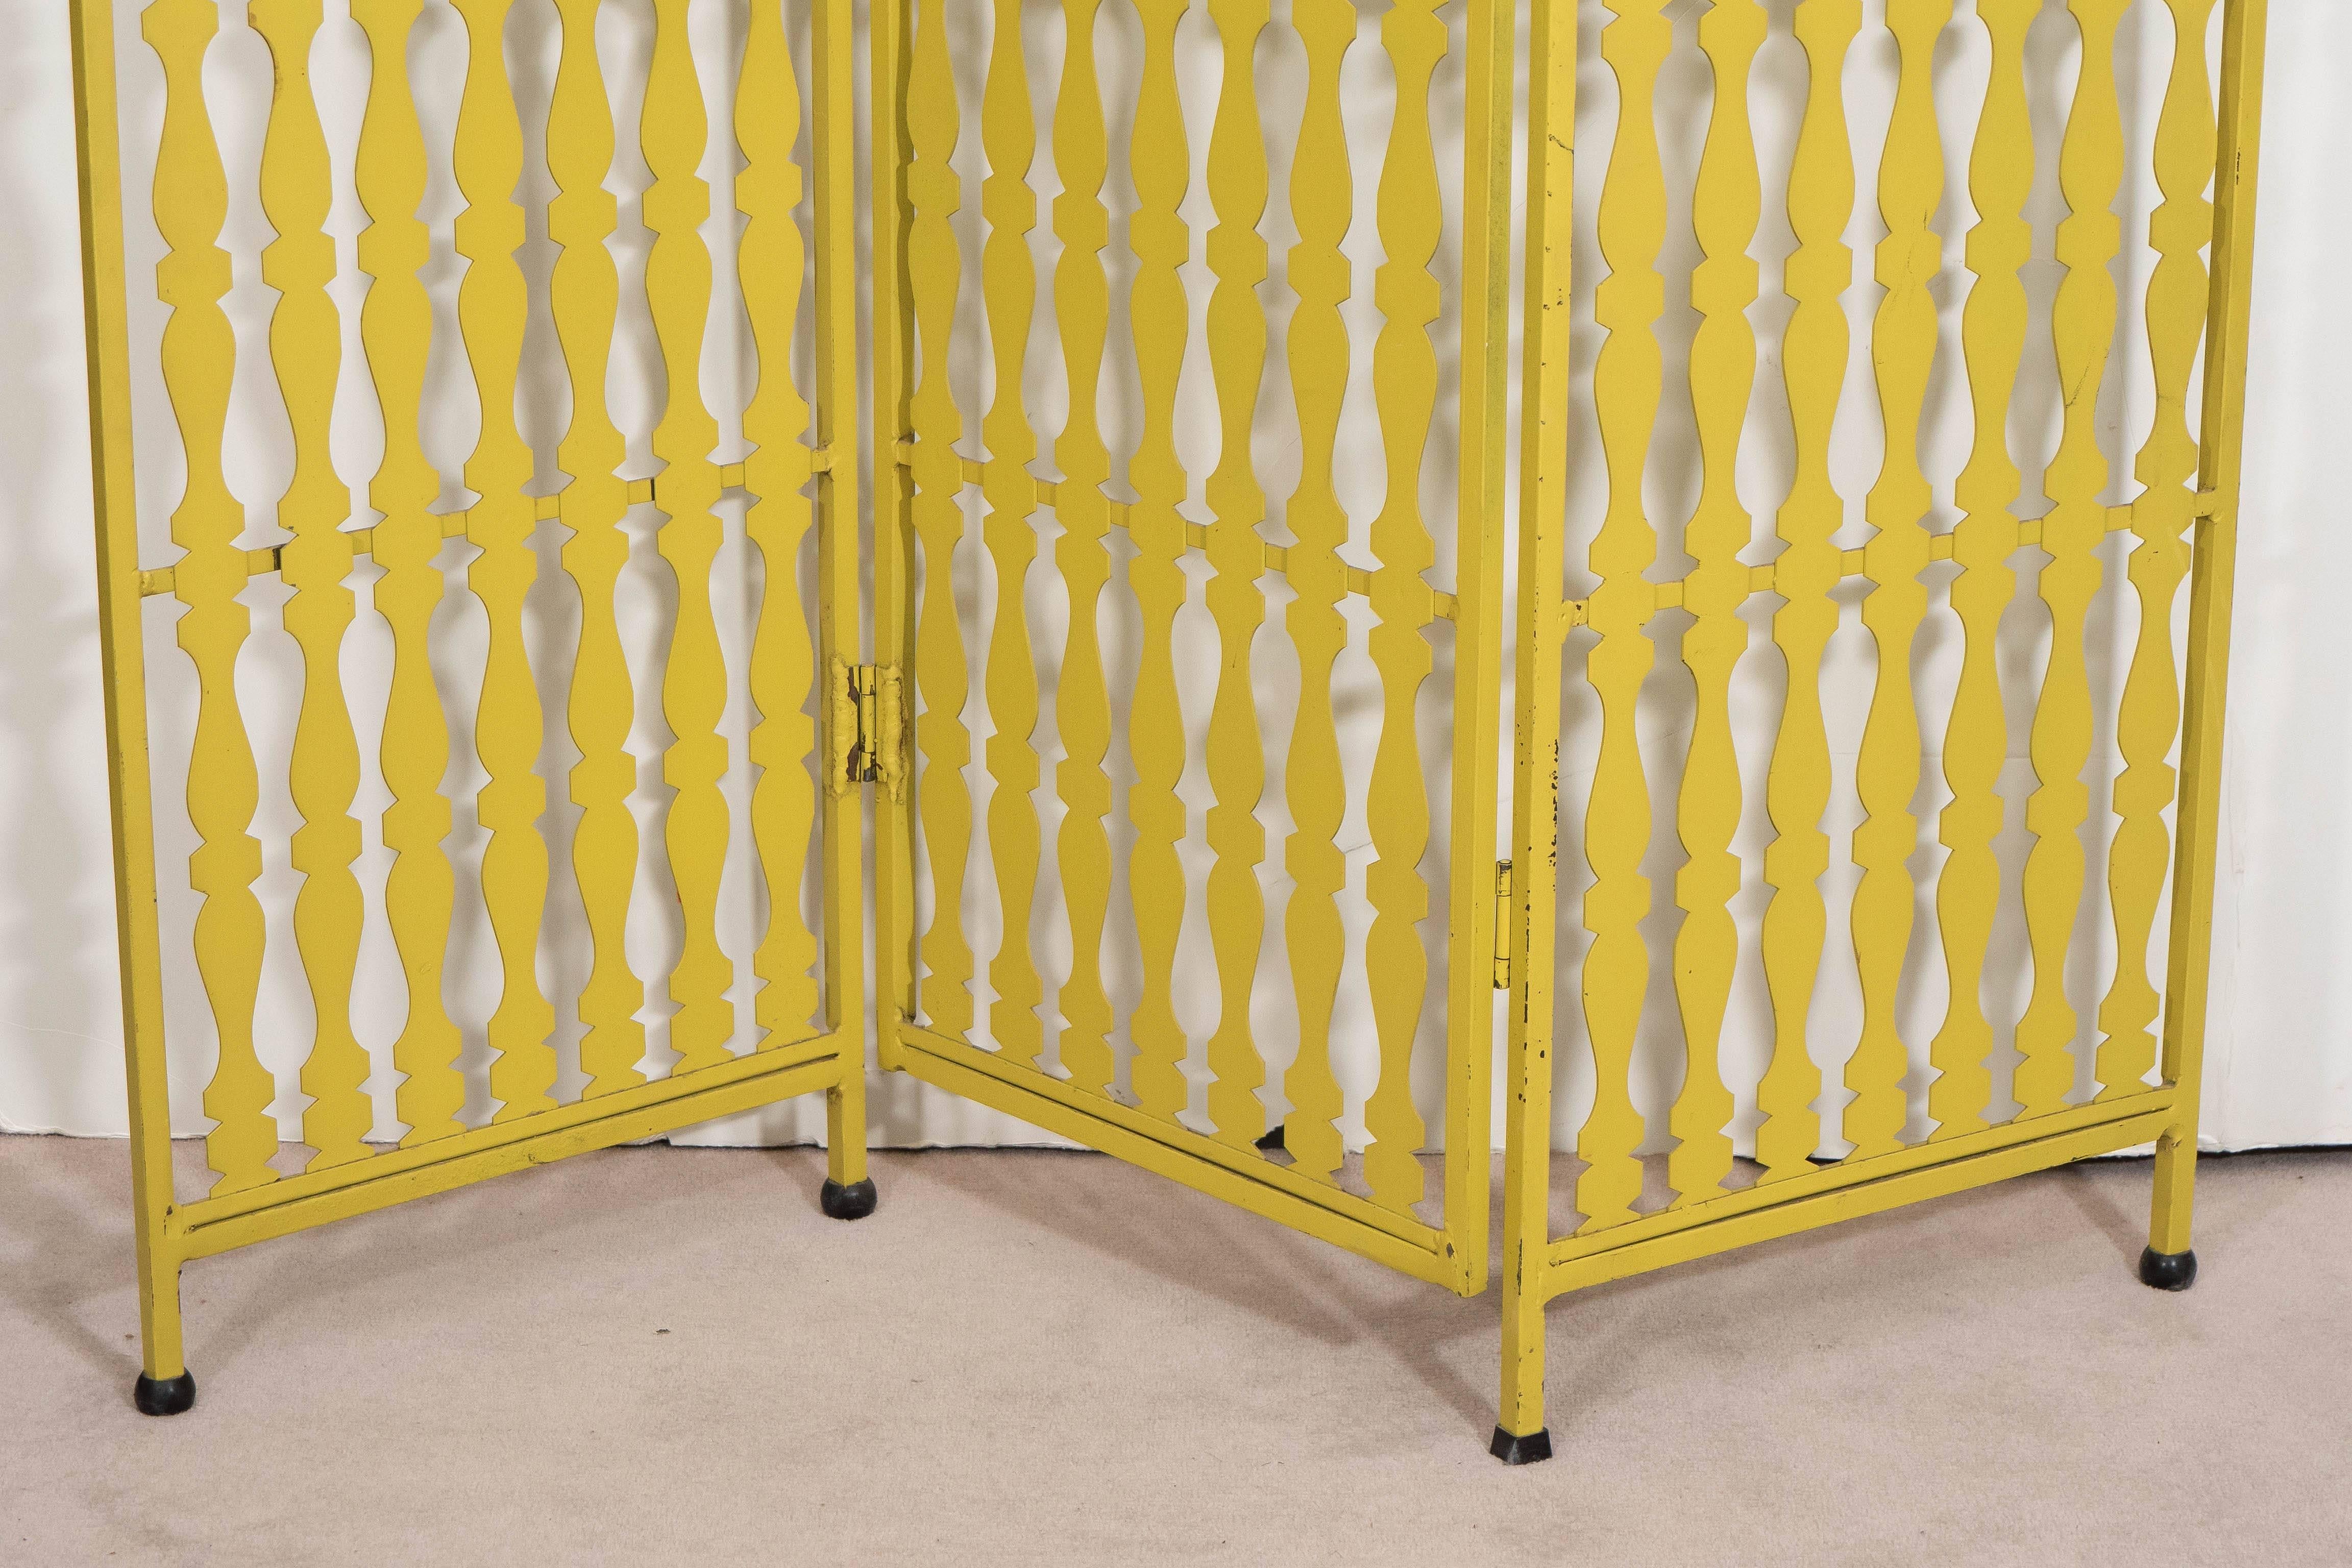 A screen and room divider by designer Arthur Umanoff, produced circa 1950s, in welded and enameled metal with three folding panels, composed of cut-out baluster rails and ball form feet and finials. This piece remains in good vintage condition, with